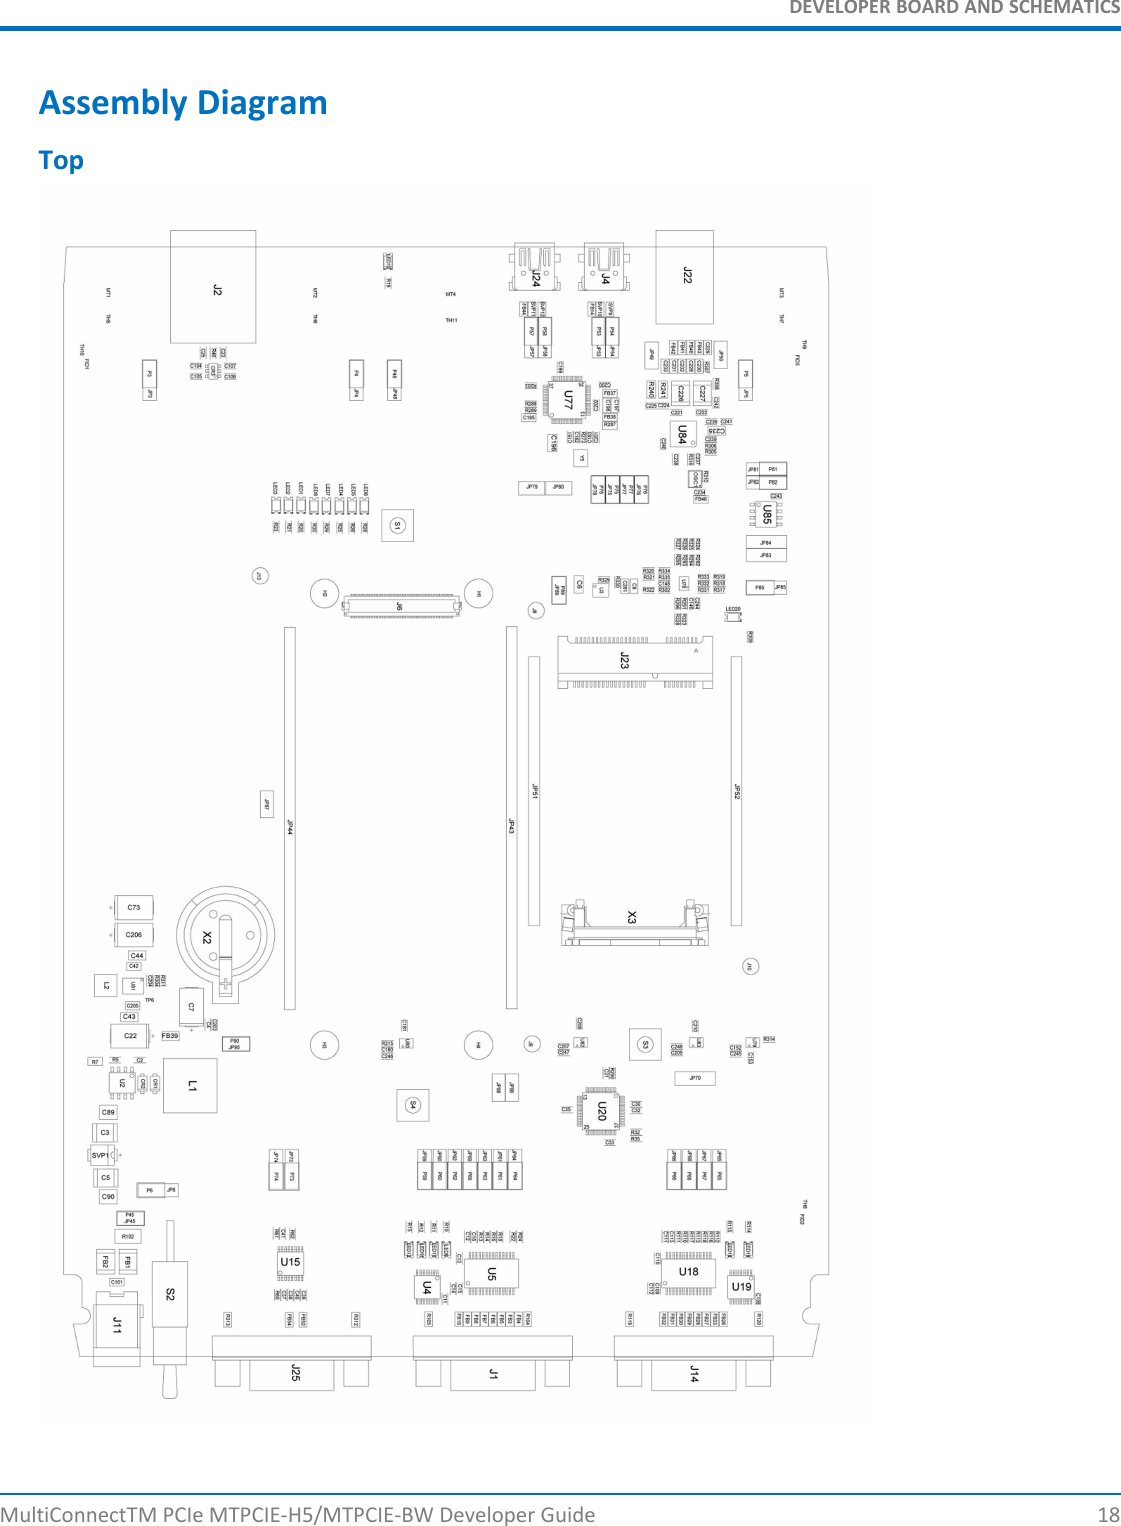 DEVELOPER BOARD AND SCHEMATICSAssembly DiagramTopMultiConnectTM PCIe MTPCIE-H5/MTPCIE-BW Developer Guide 18